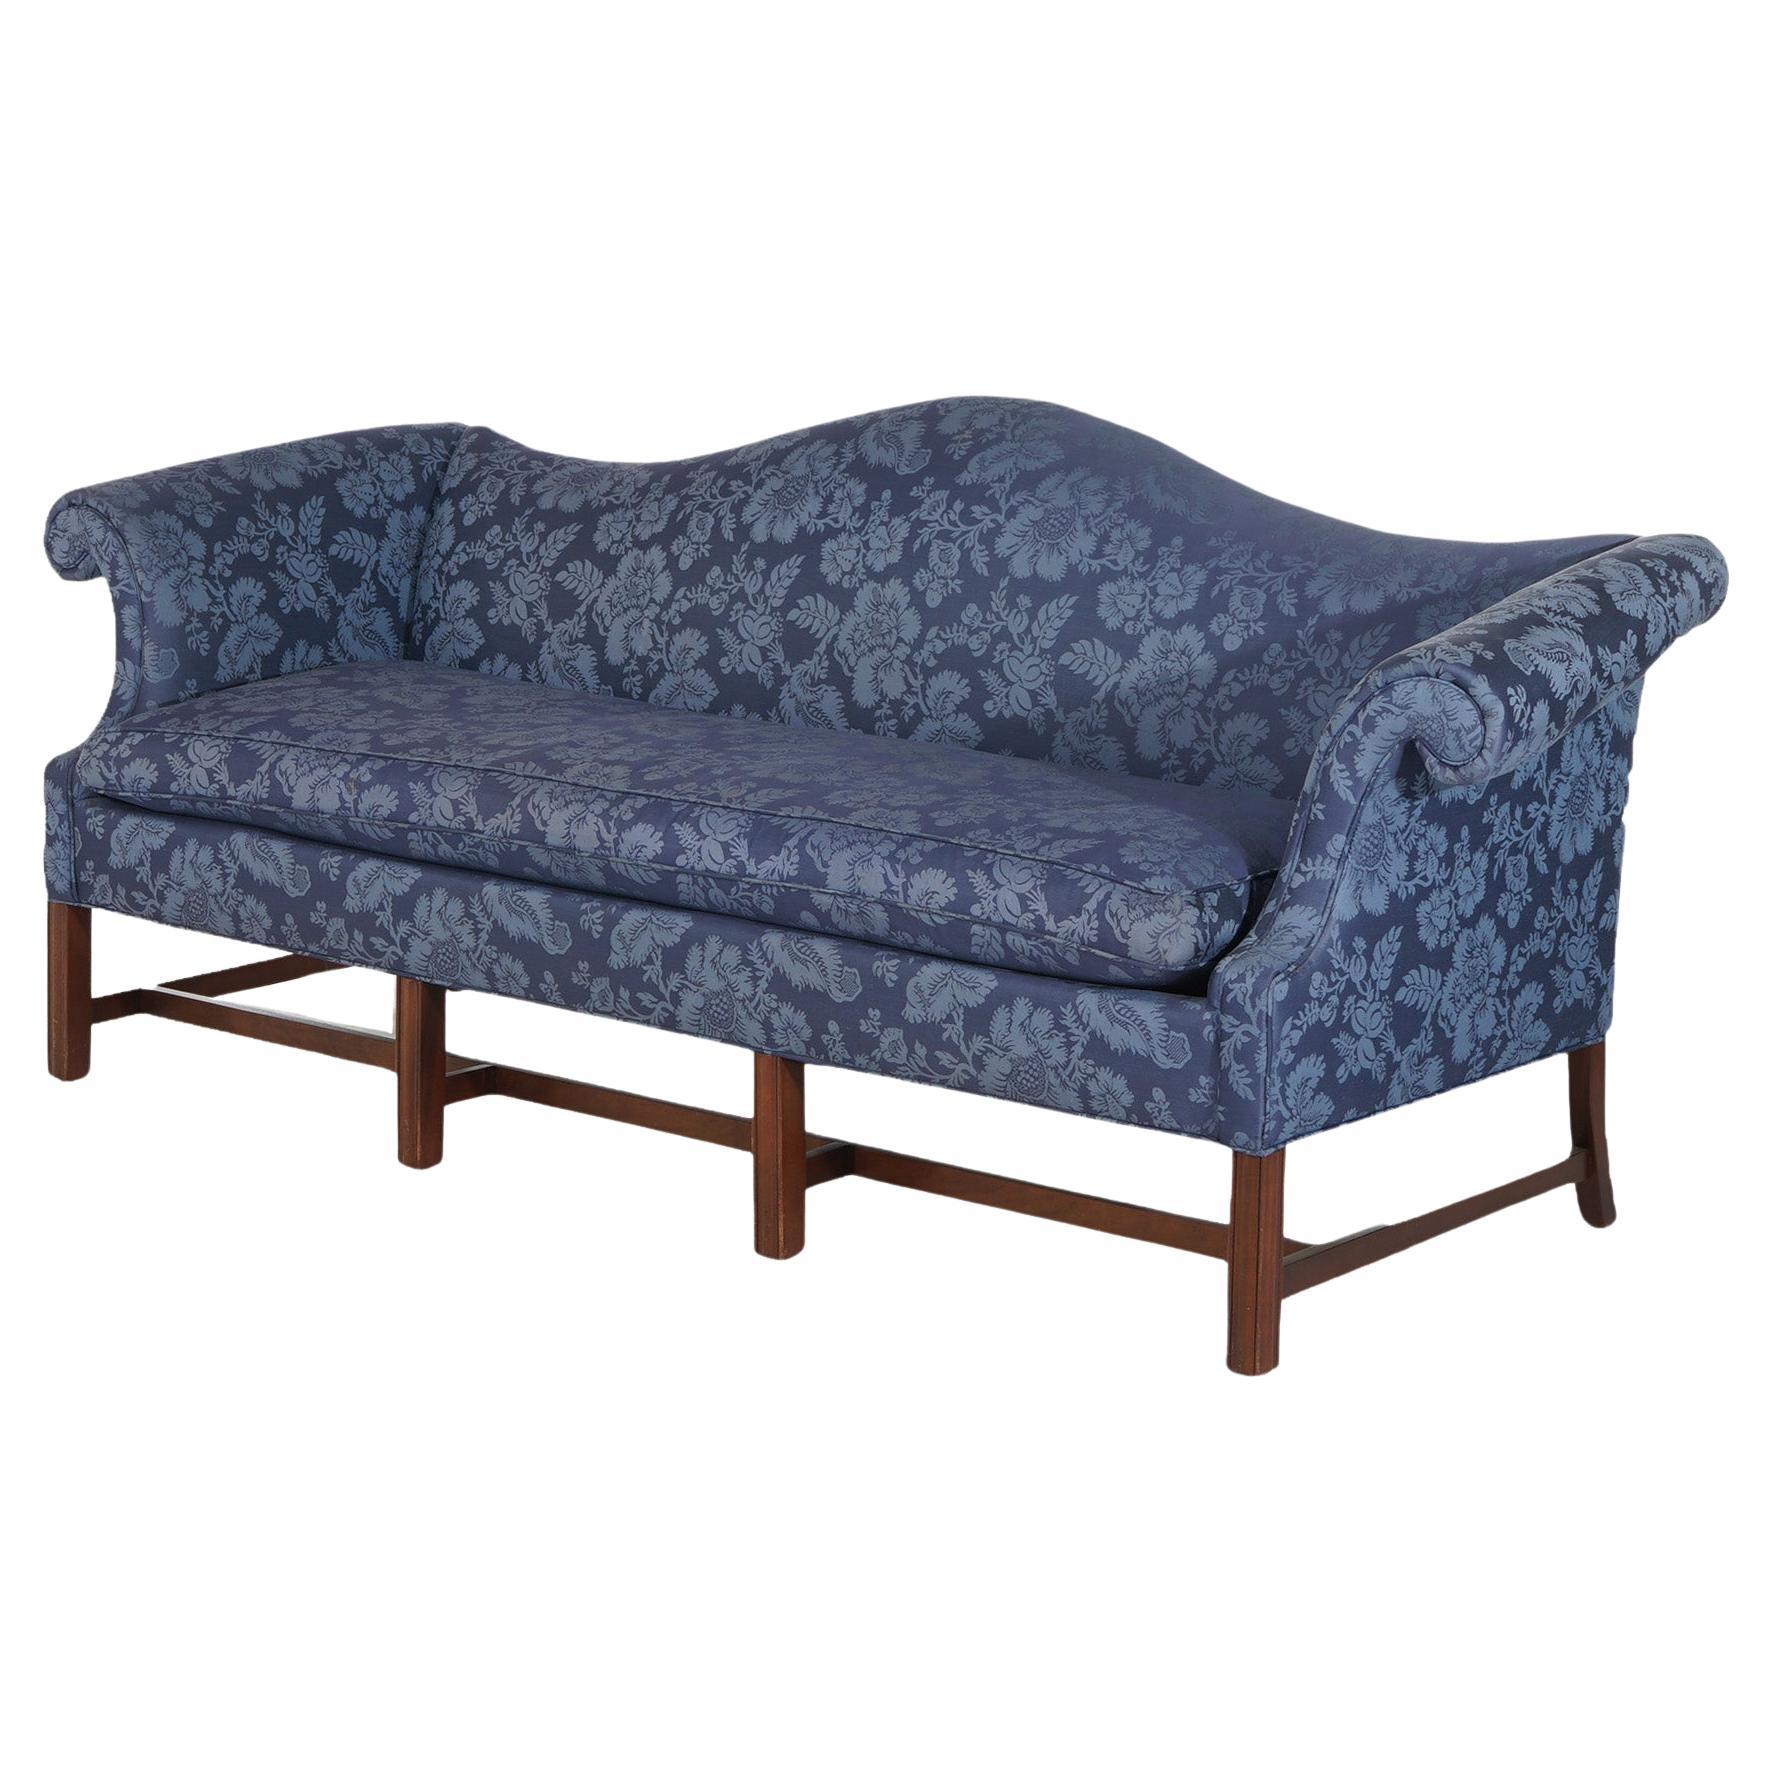 Antique Chippendale Camelback Sofa with Scroll Arms, Blue, C1930 For Sale